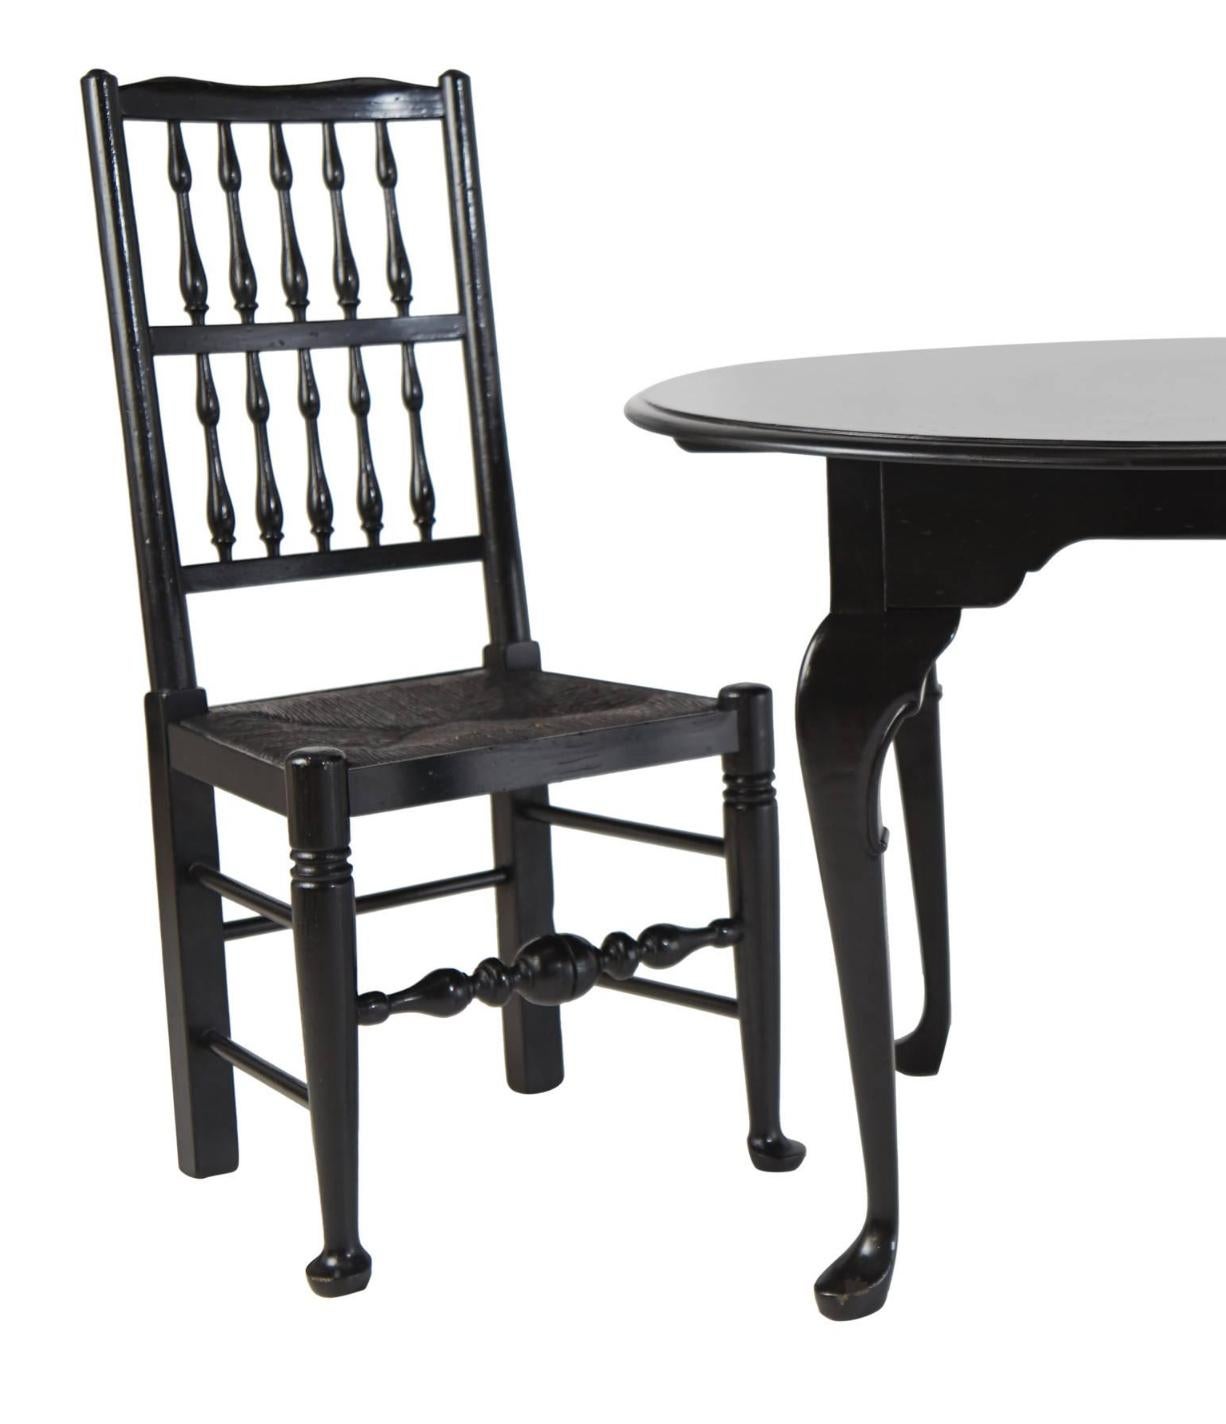 Pair of two Colonial Revival style chairs and Queen Anne style round table that have been refinished in a high gloss black lacquer. The chairs feature turned spindles and stretchers, pad feet and rushed seat. The round table comprises of curvaceous